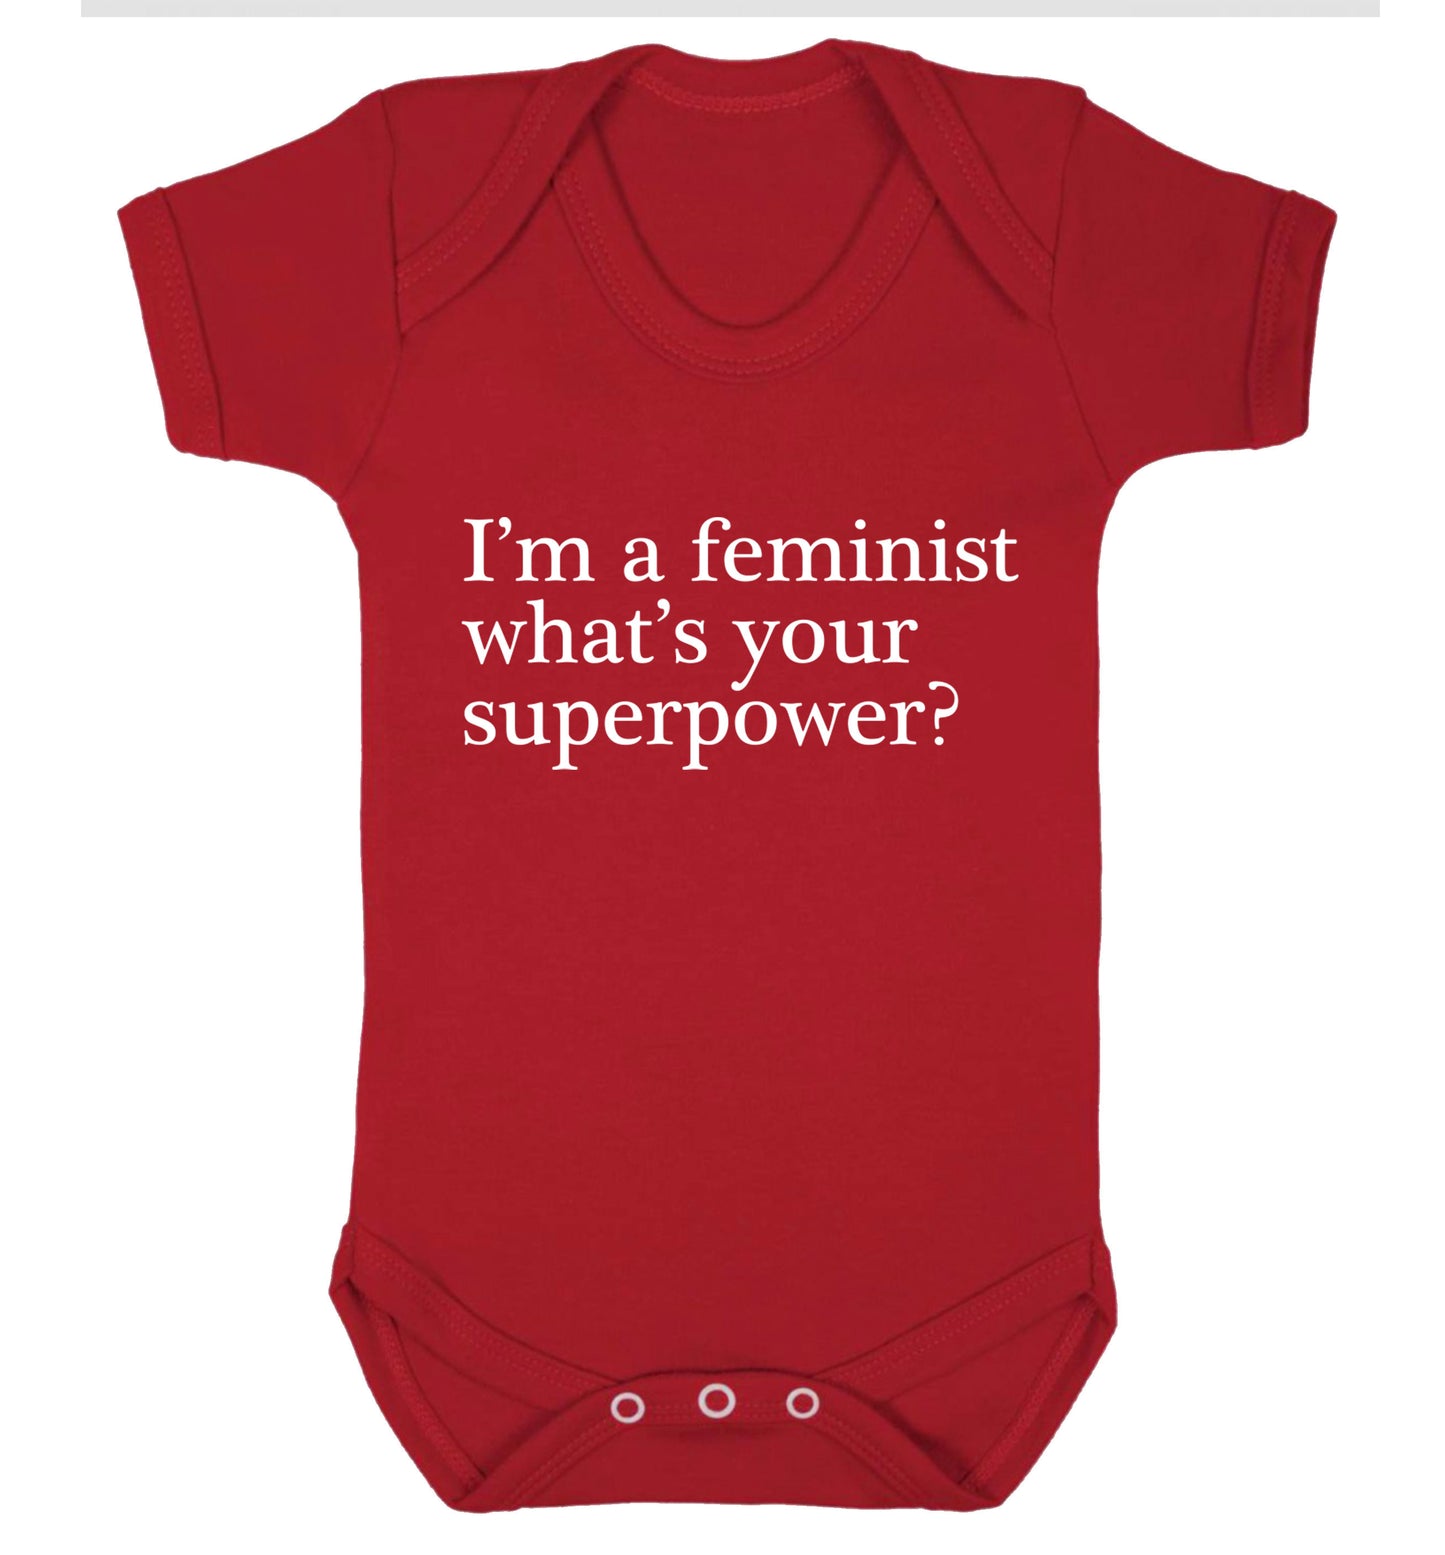 I'm a feminist what's your superpower? Baby Vest red 18-24 months